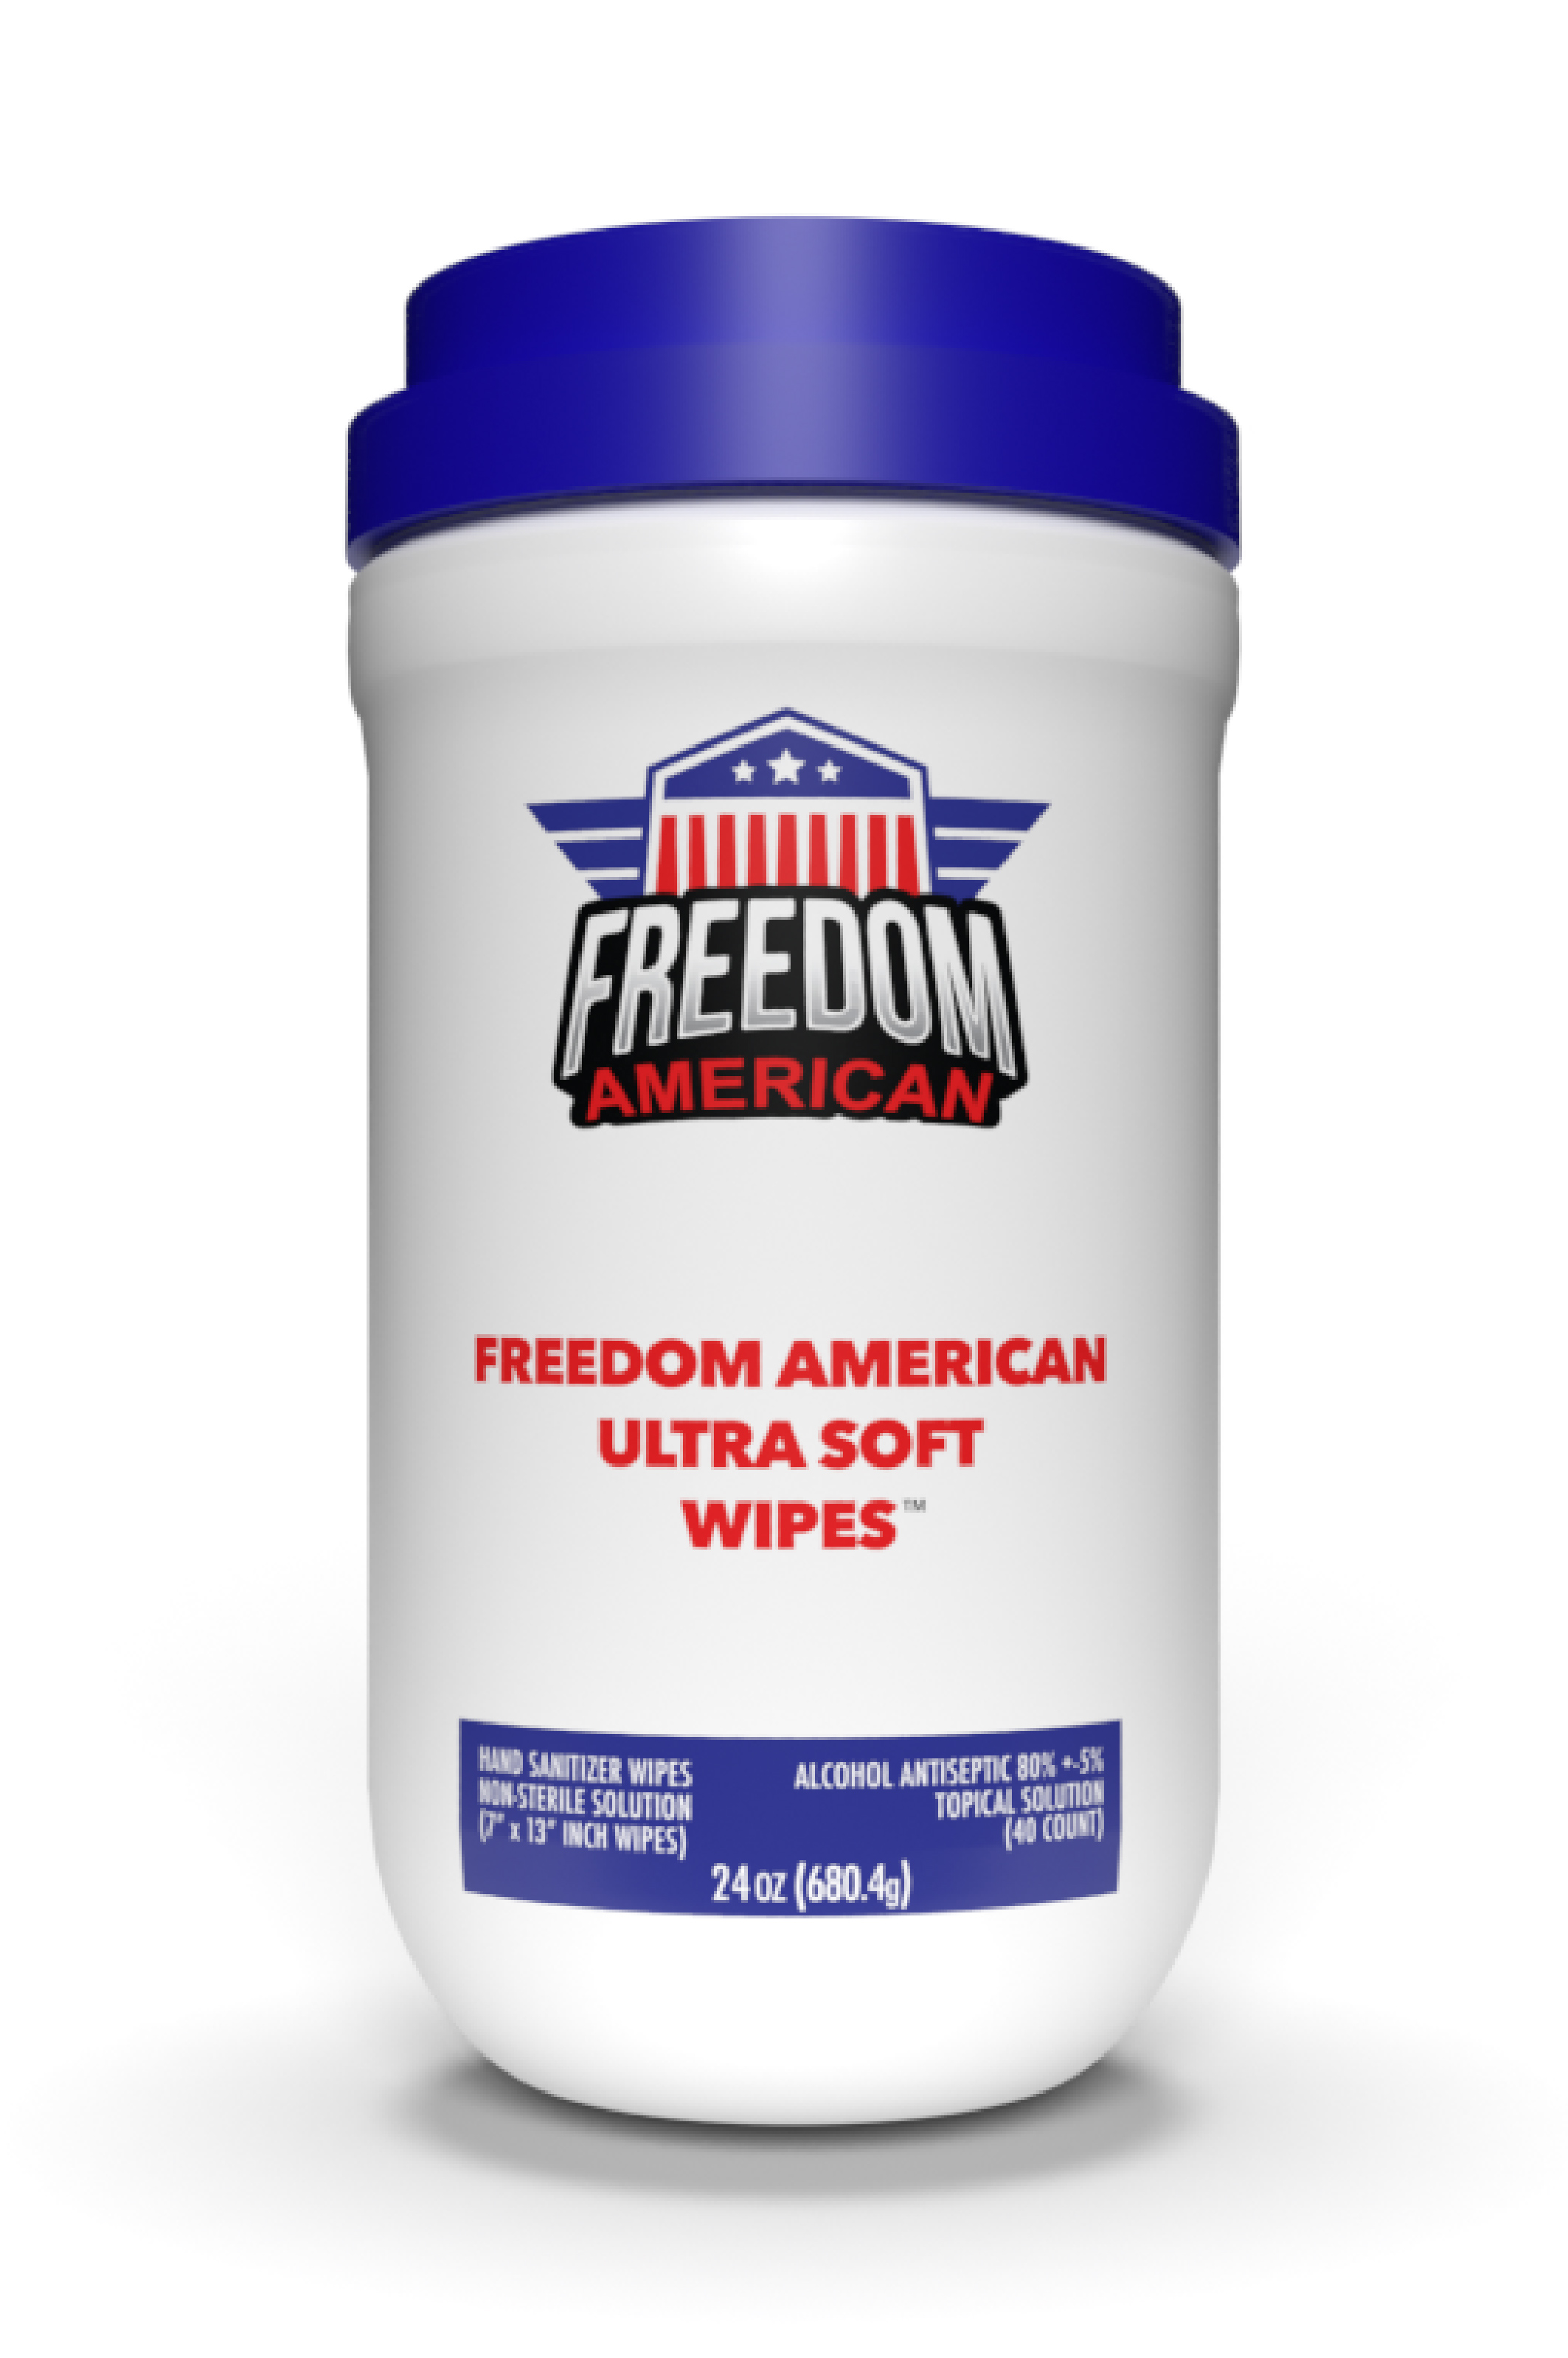 Freedom American 24 oz Hand Sanitizer Wipes (40 Count) Front Label